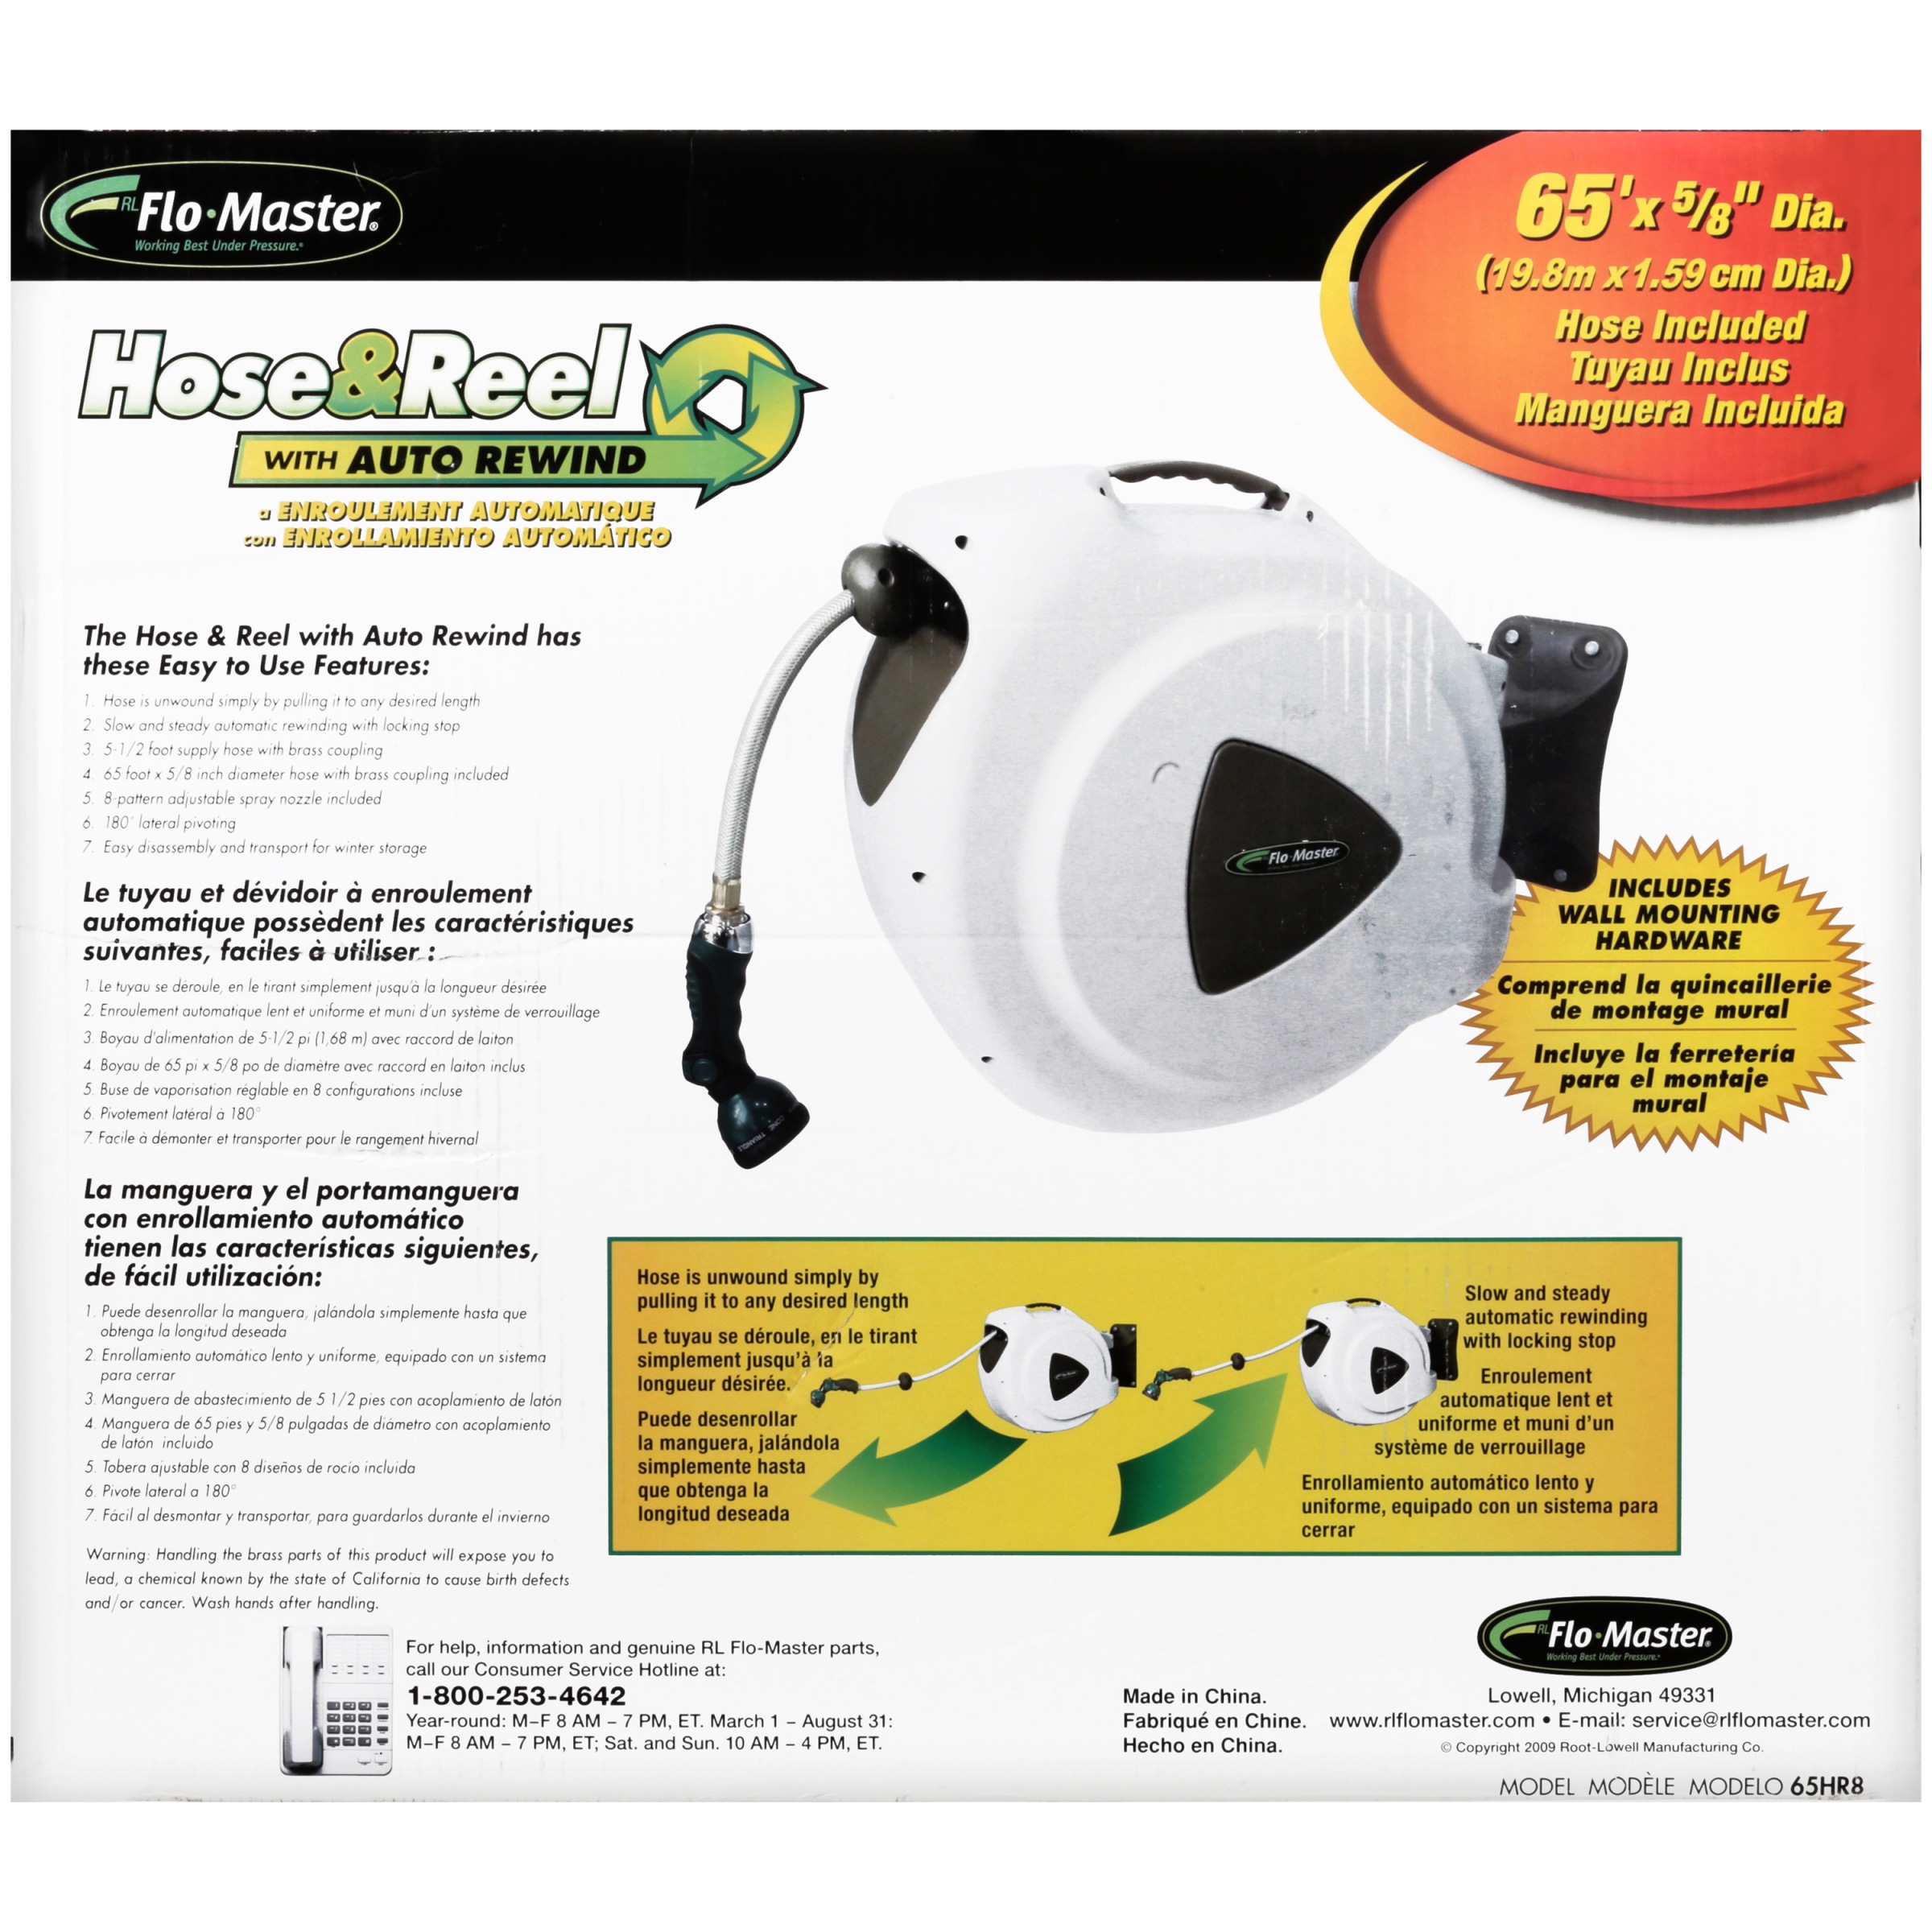 RL Flo-Master 65 Foot Hose & Reel with Auto Rewind - image 3 of 6